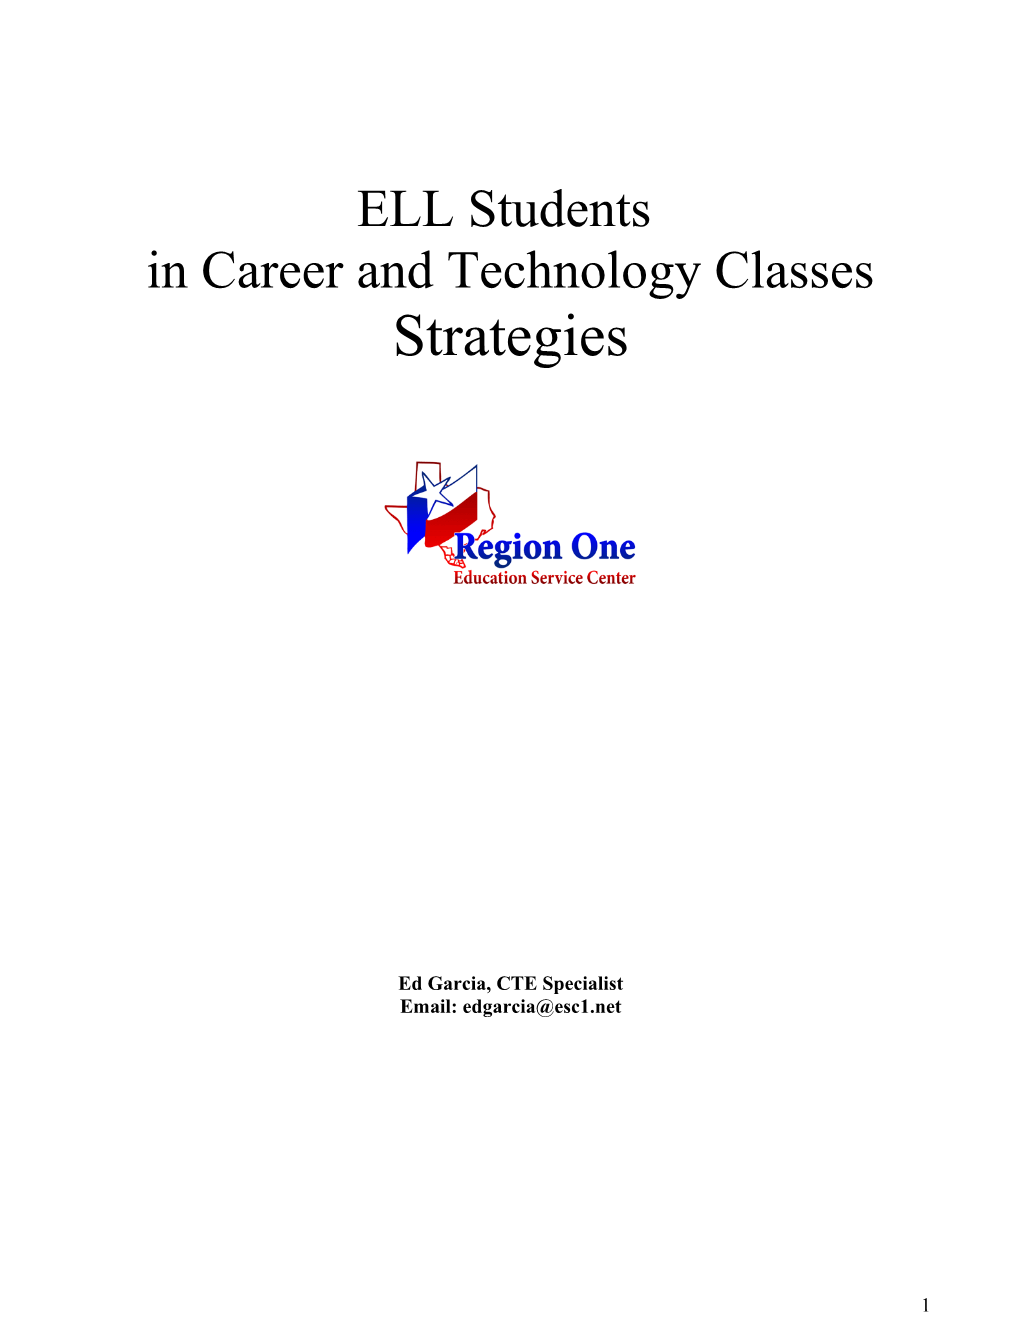 ELL Students in Career and Technology Classes